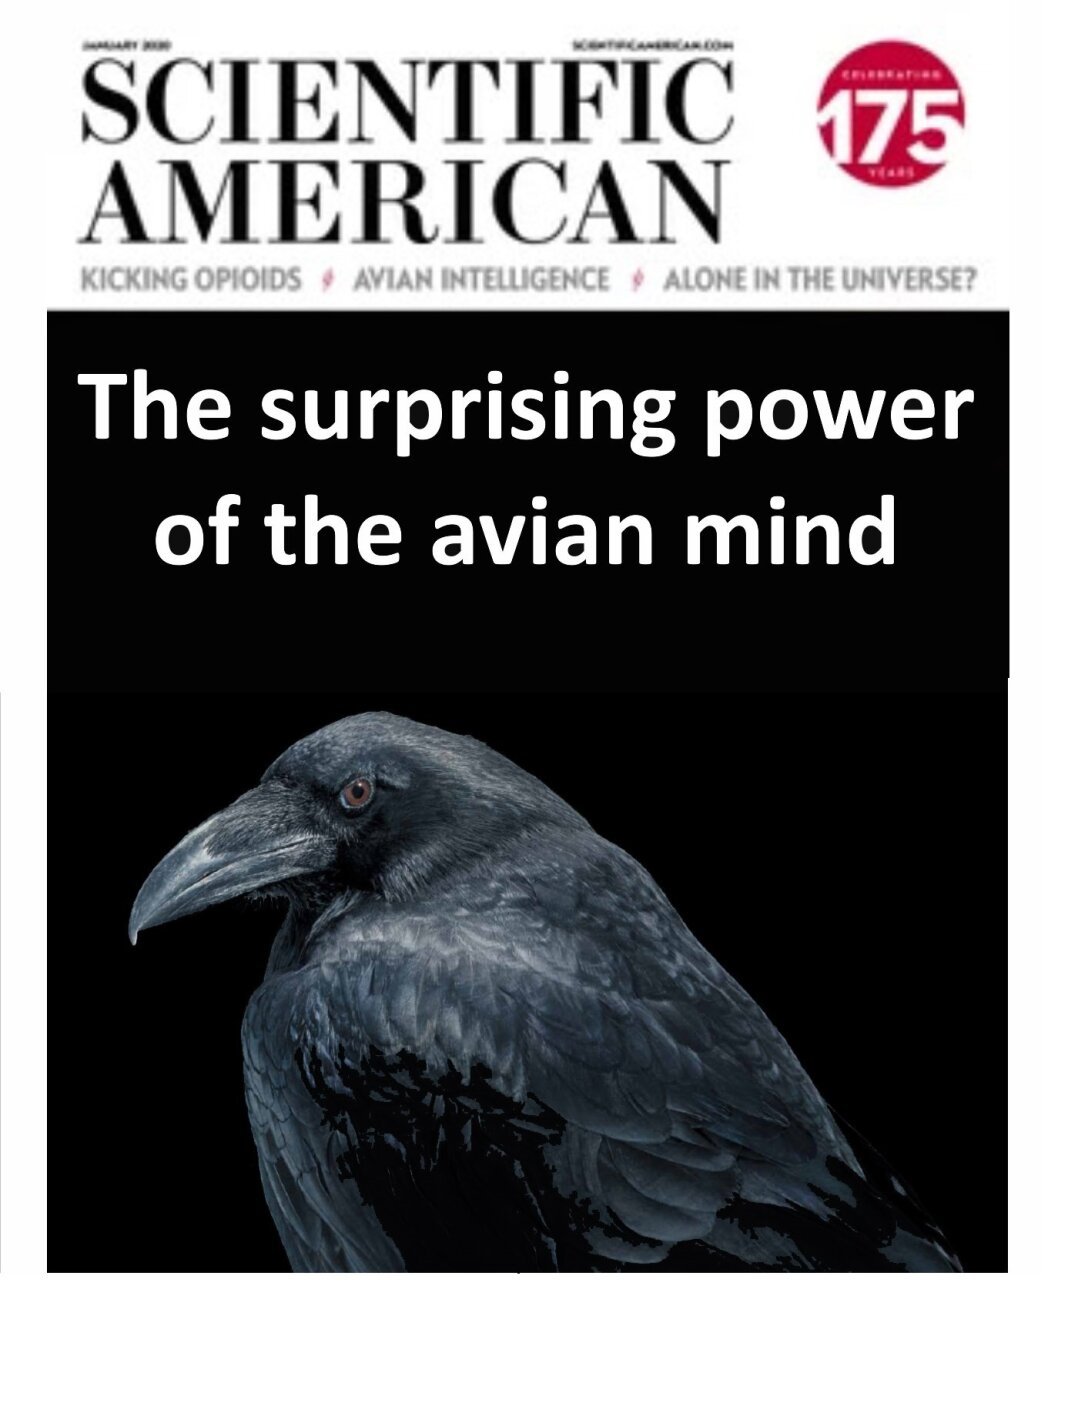 The suprising power of the avian mind